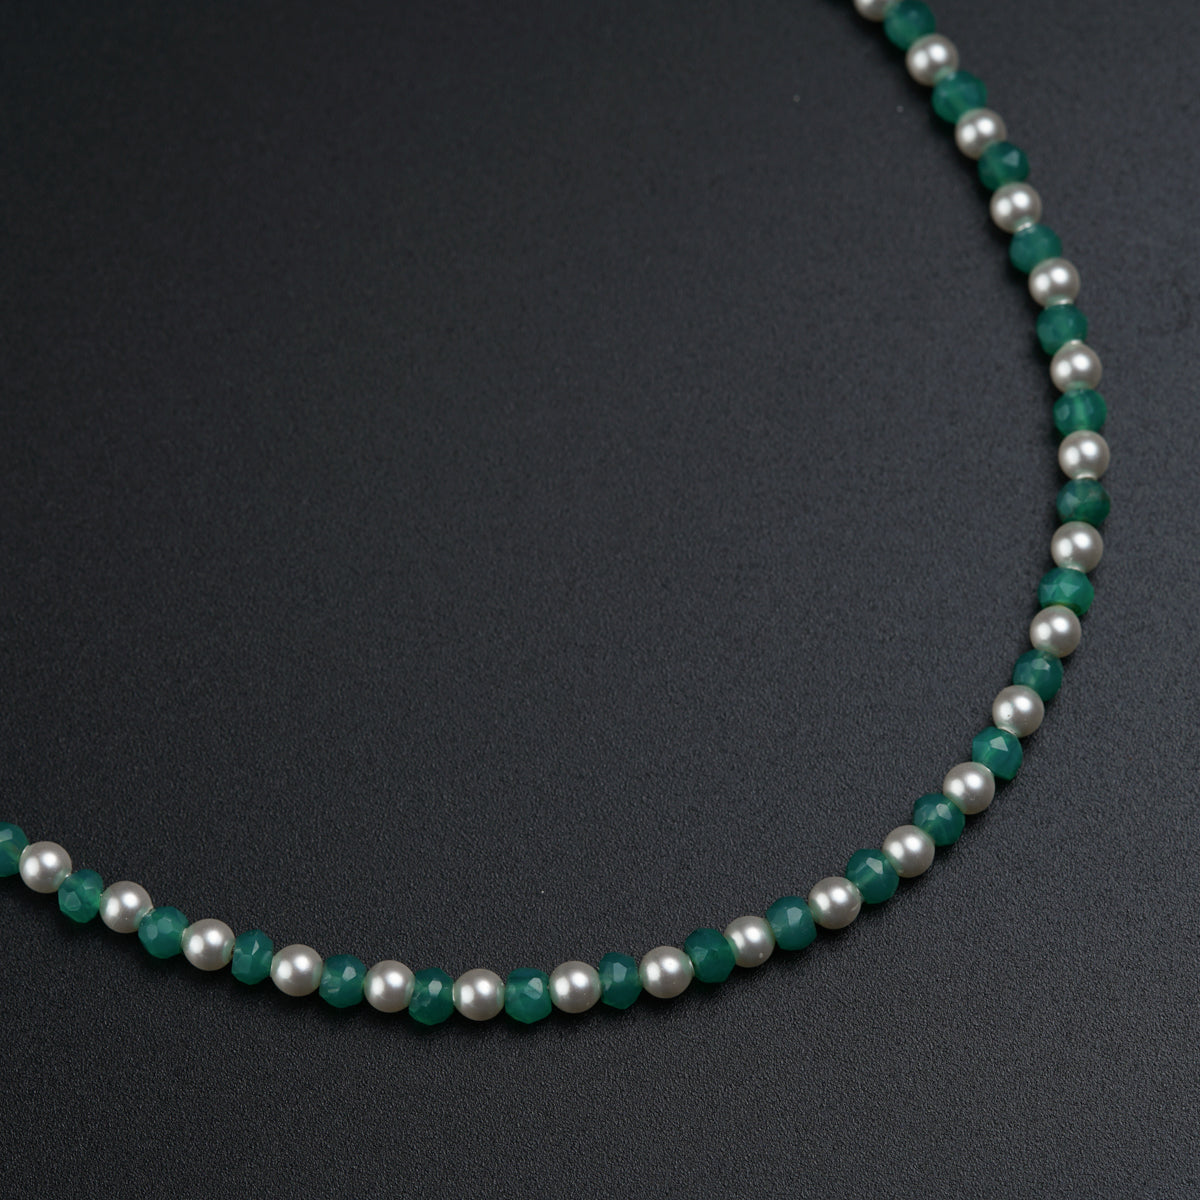 a necklace with pearls and green beads on a black surface